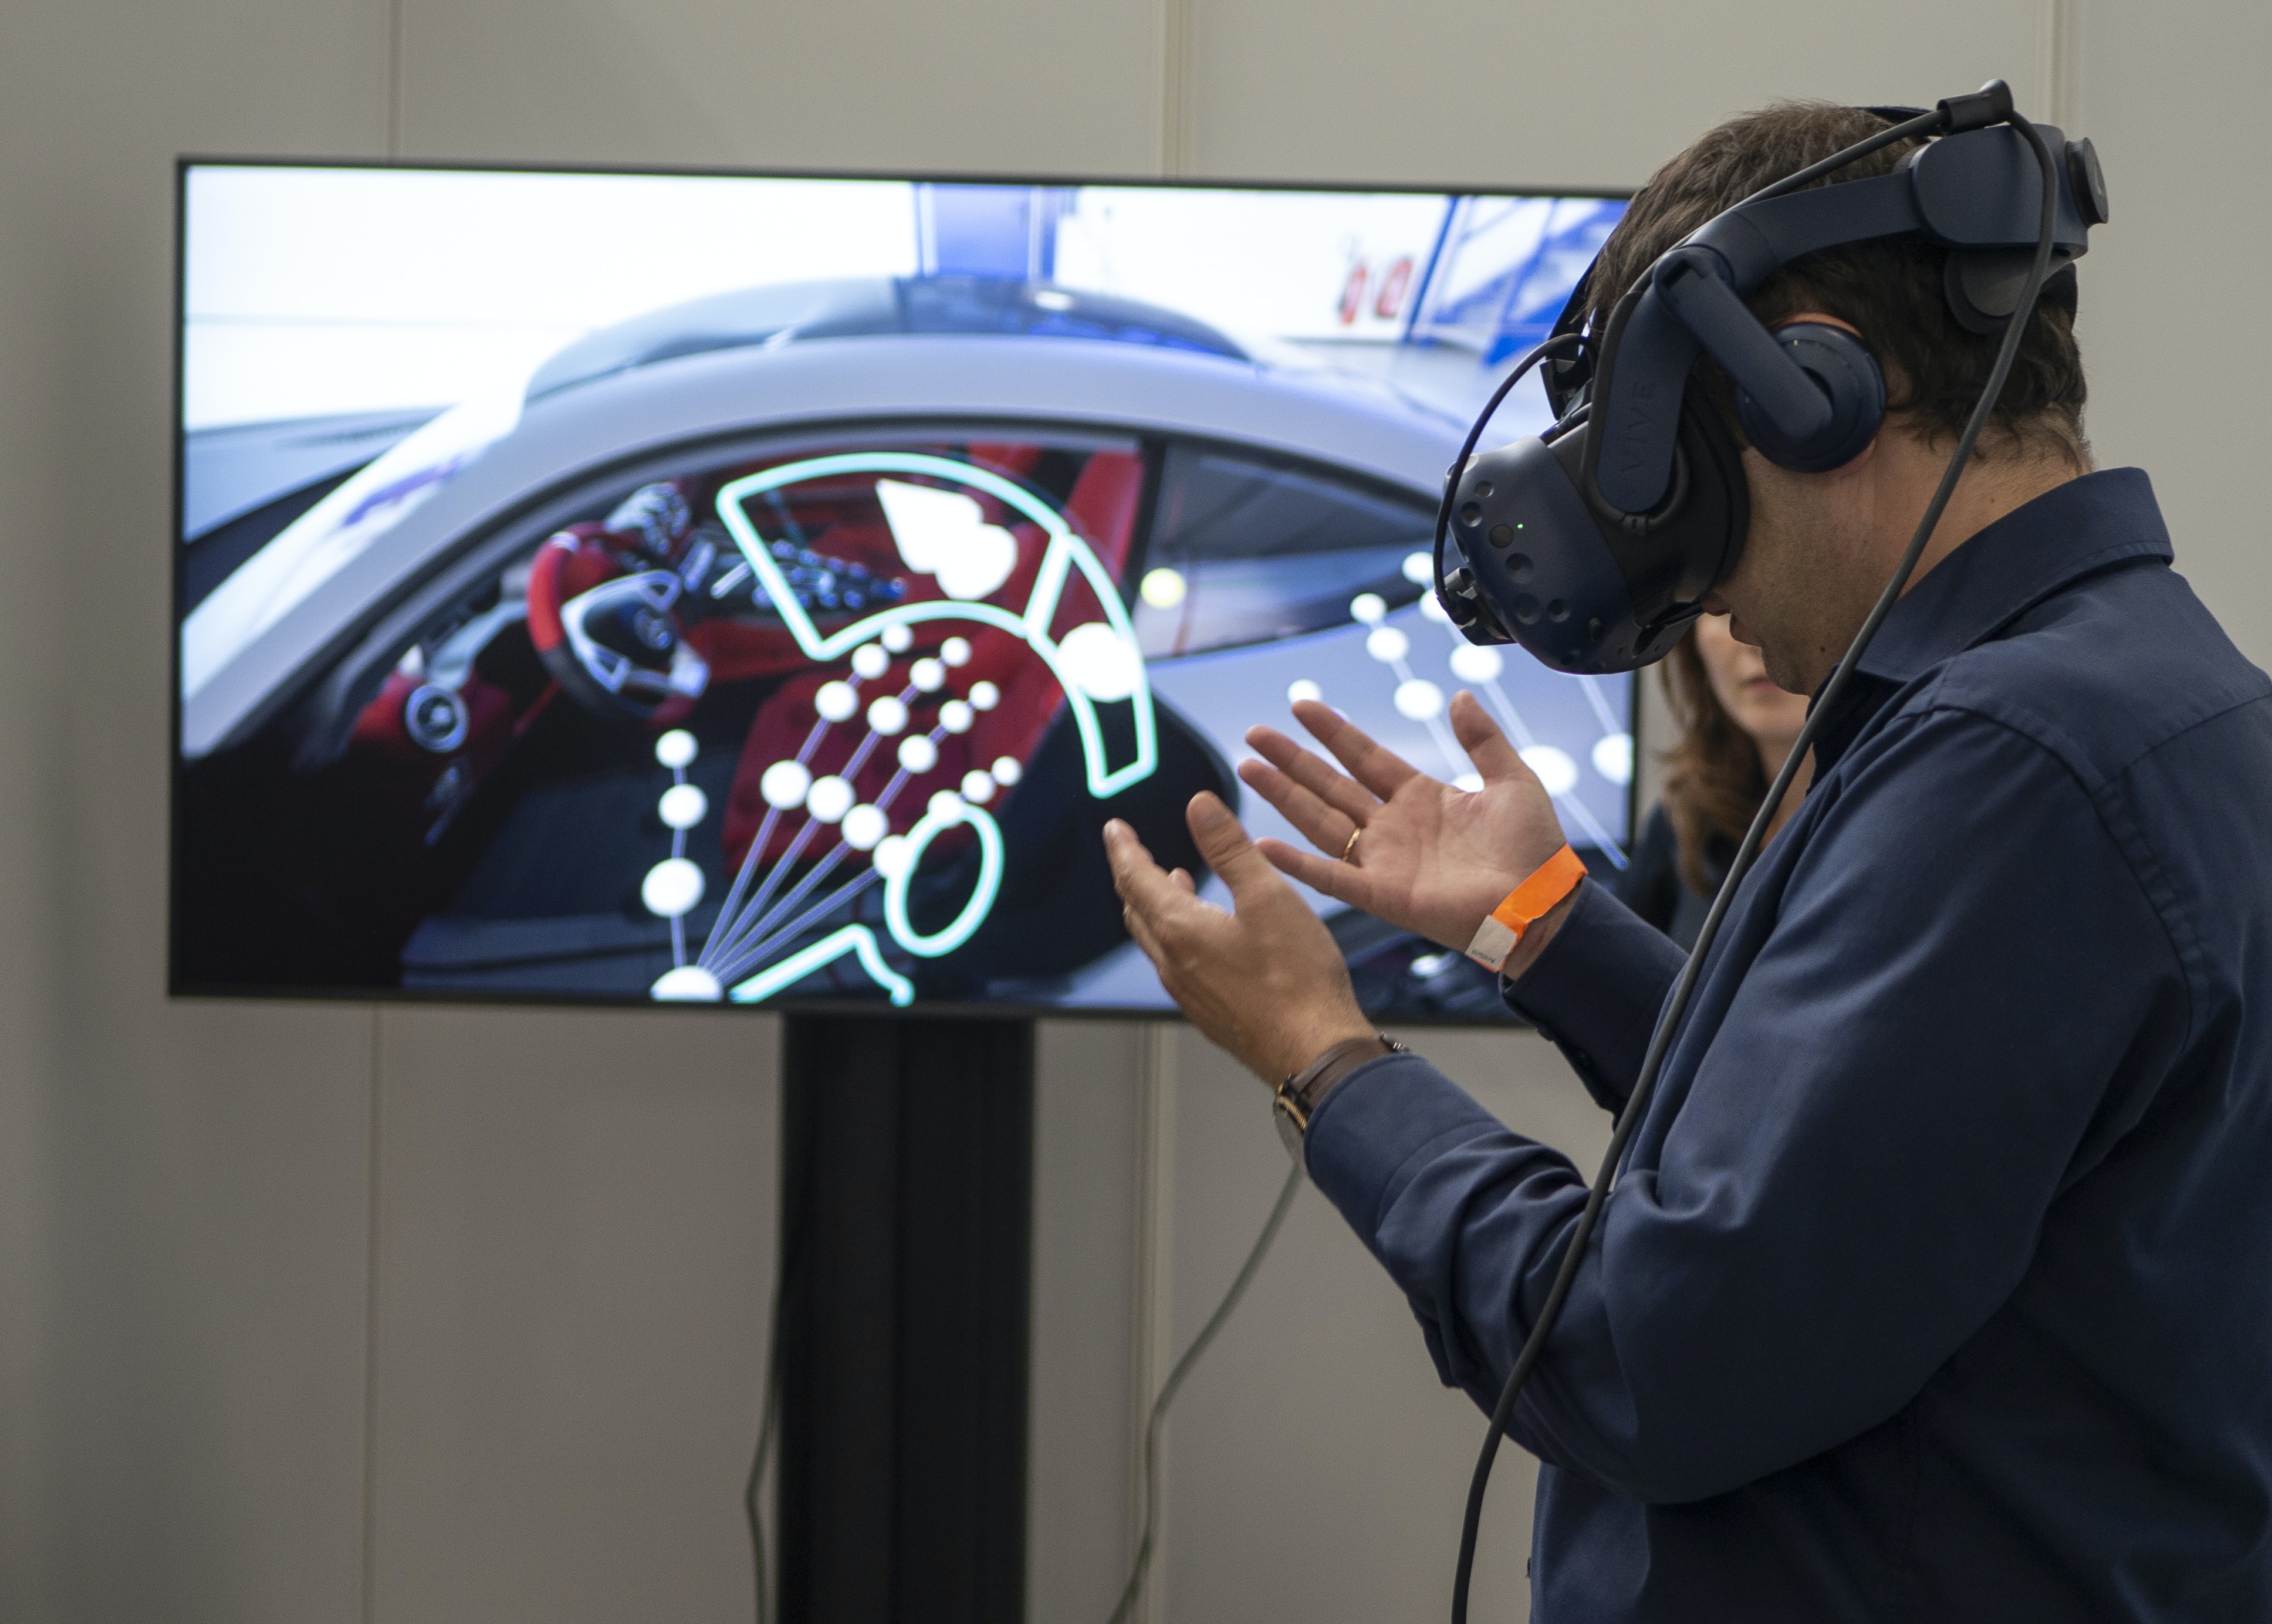 XR Expo 2019: pameran untuk virtual reality (vr), augmented reality (ar), mixed reality (mr) dan extended reality (xr)